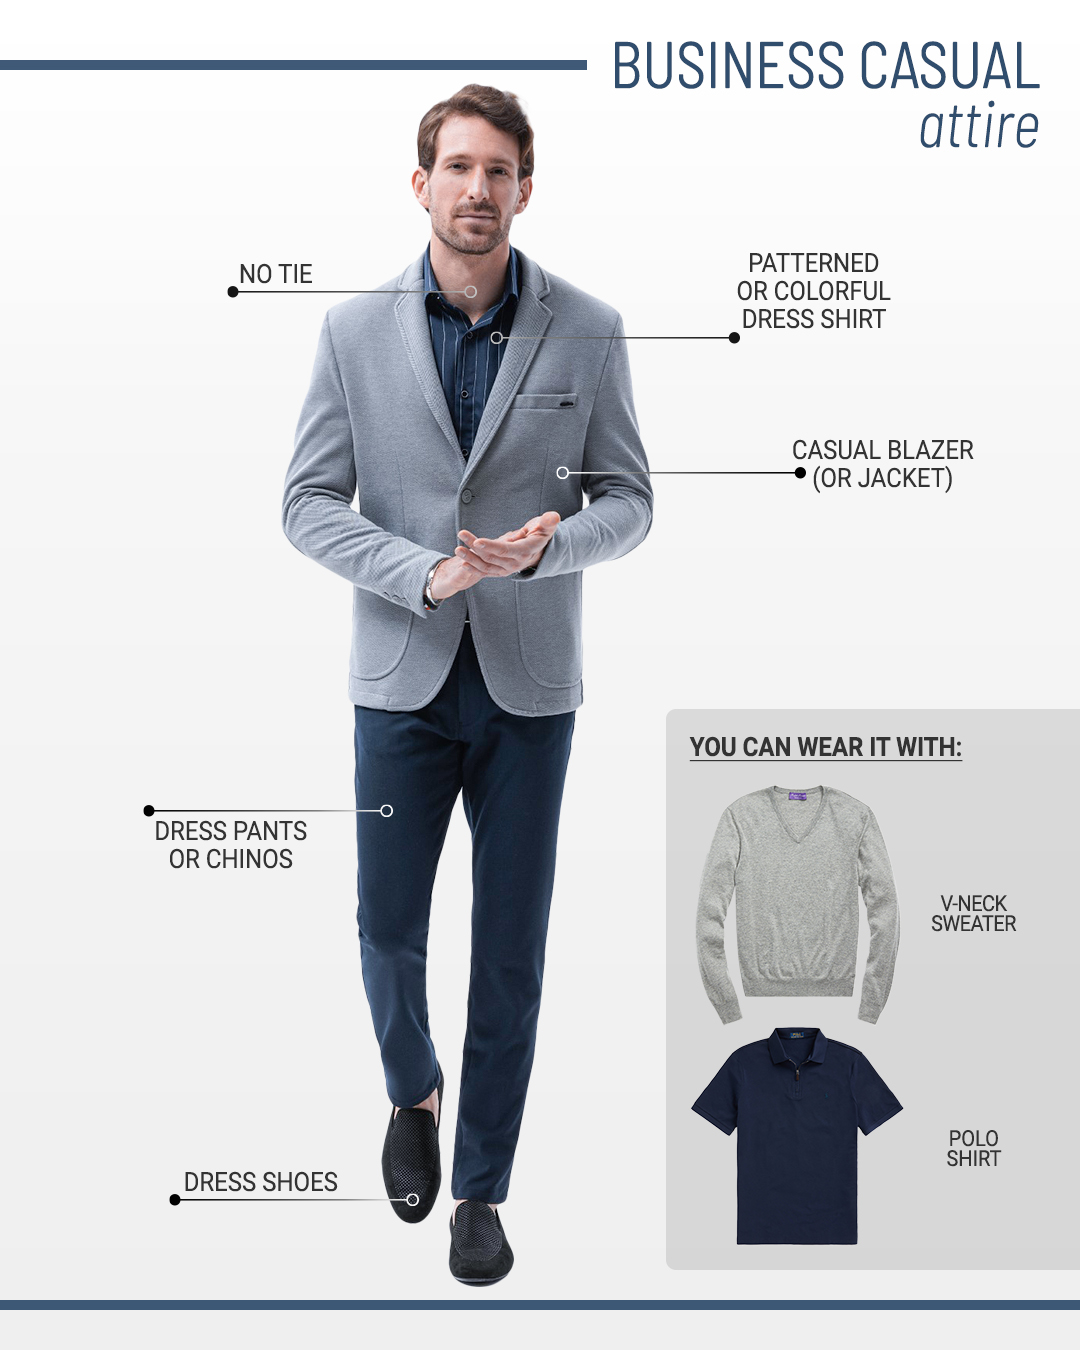 Business casual dress code and outfits for men